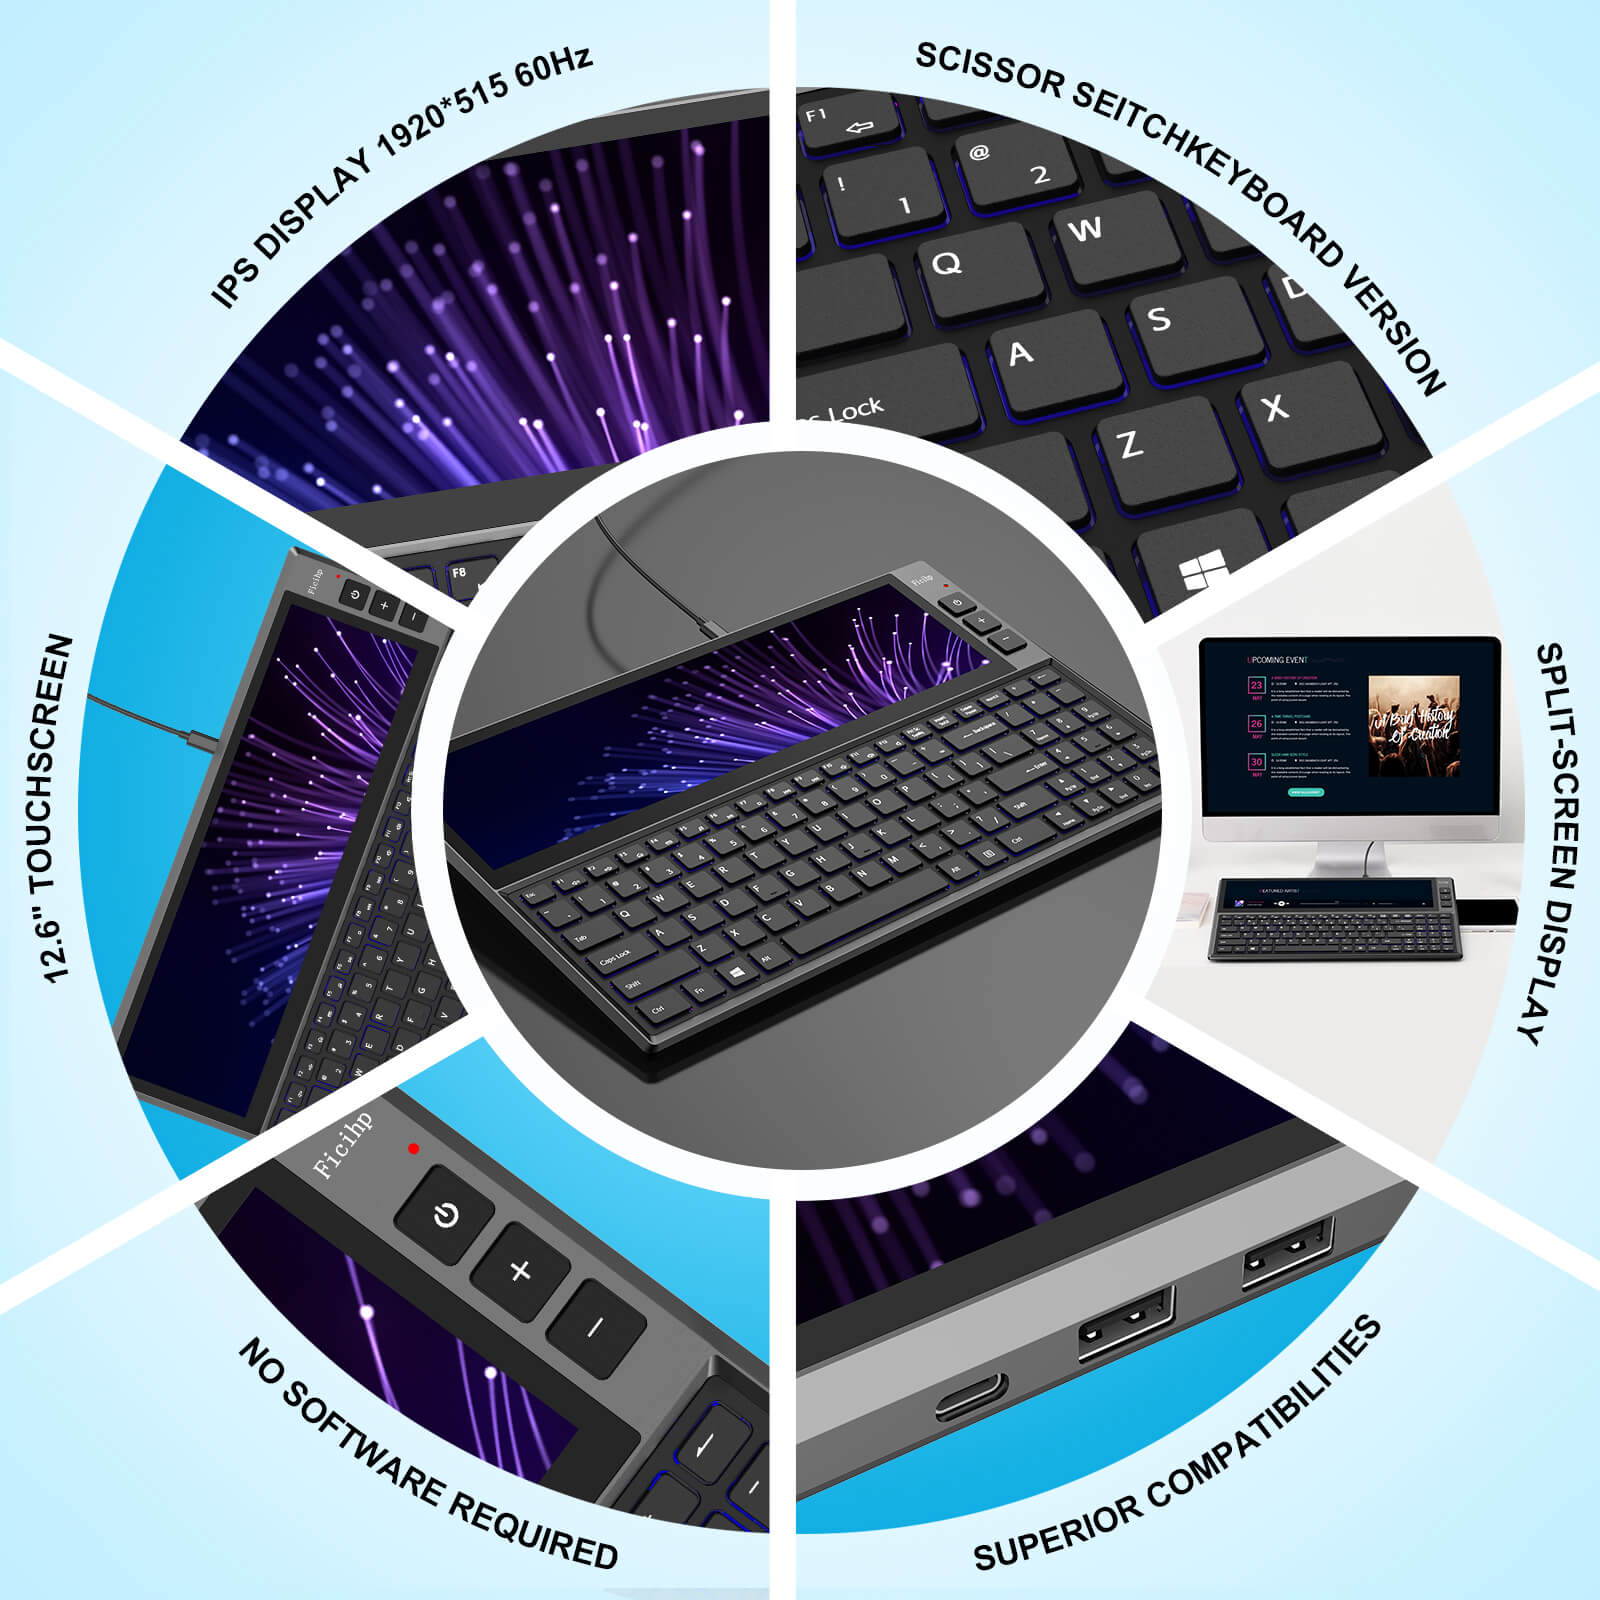 CopGain RGB Keyboard with Built-in 12.6" Touchscreen Monitor K1